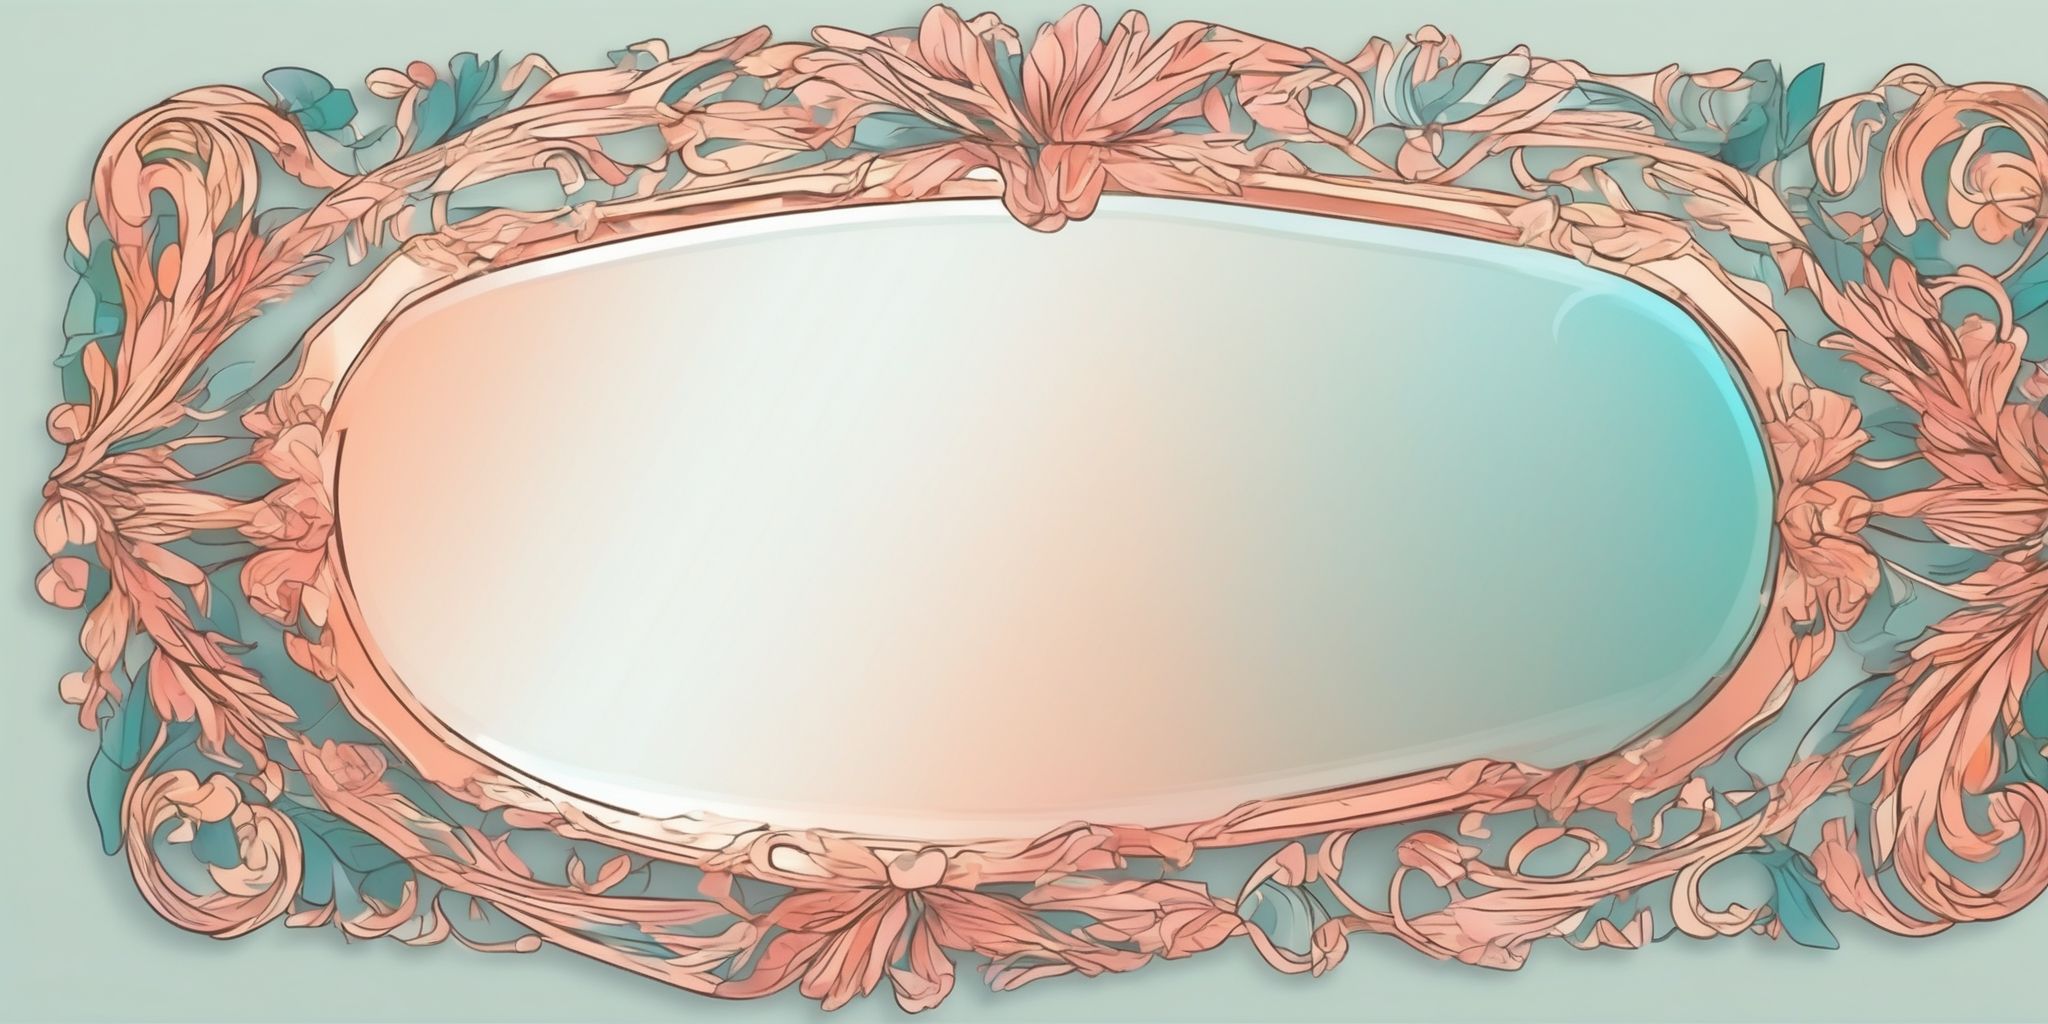 Mirror in illustration style with gradients and white background